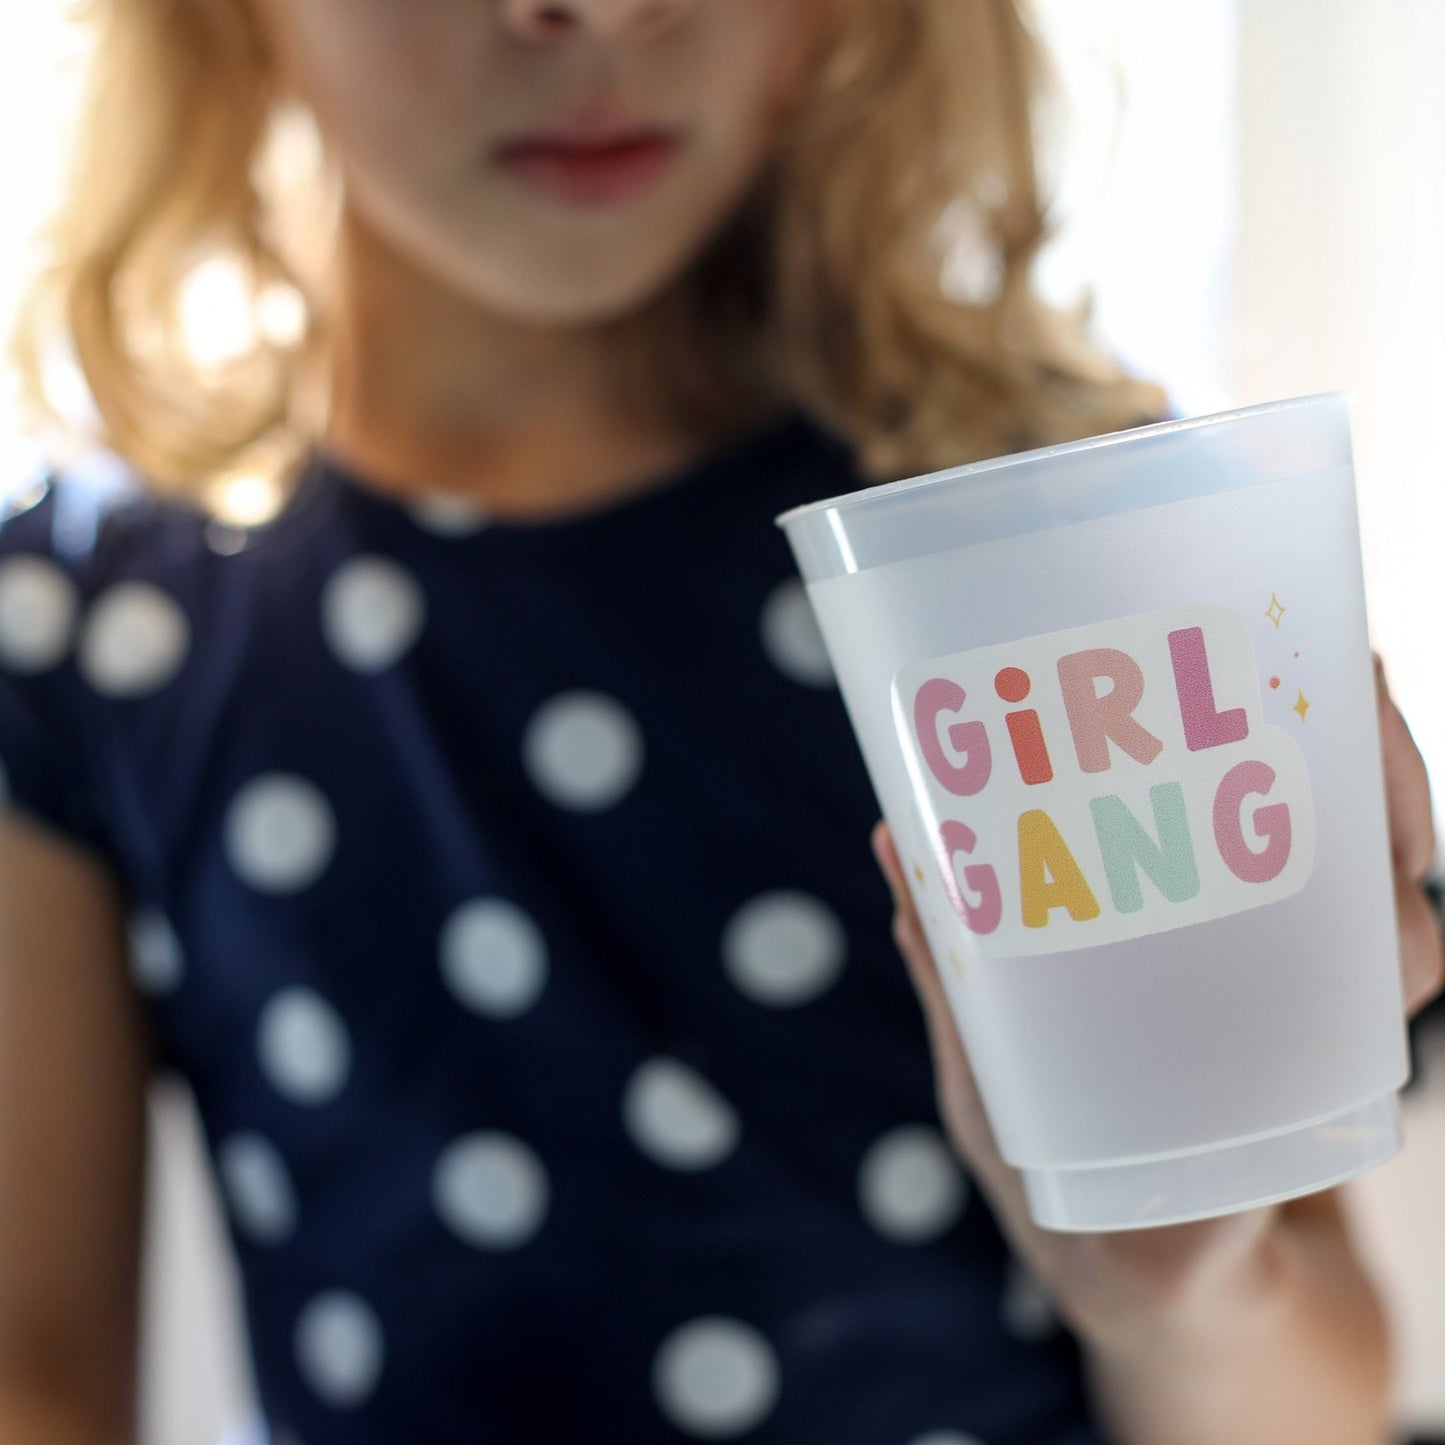 Girl Gang Frosted Cups (Set of 6) - Henry + Olives